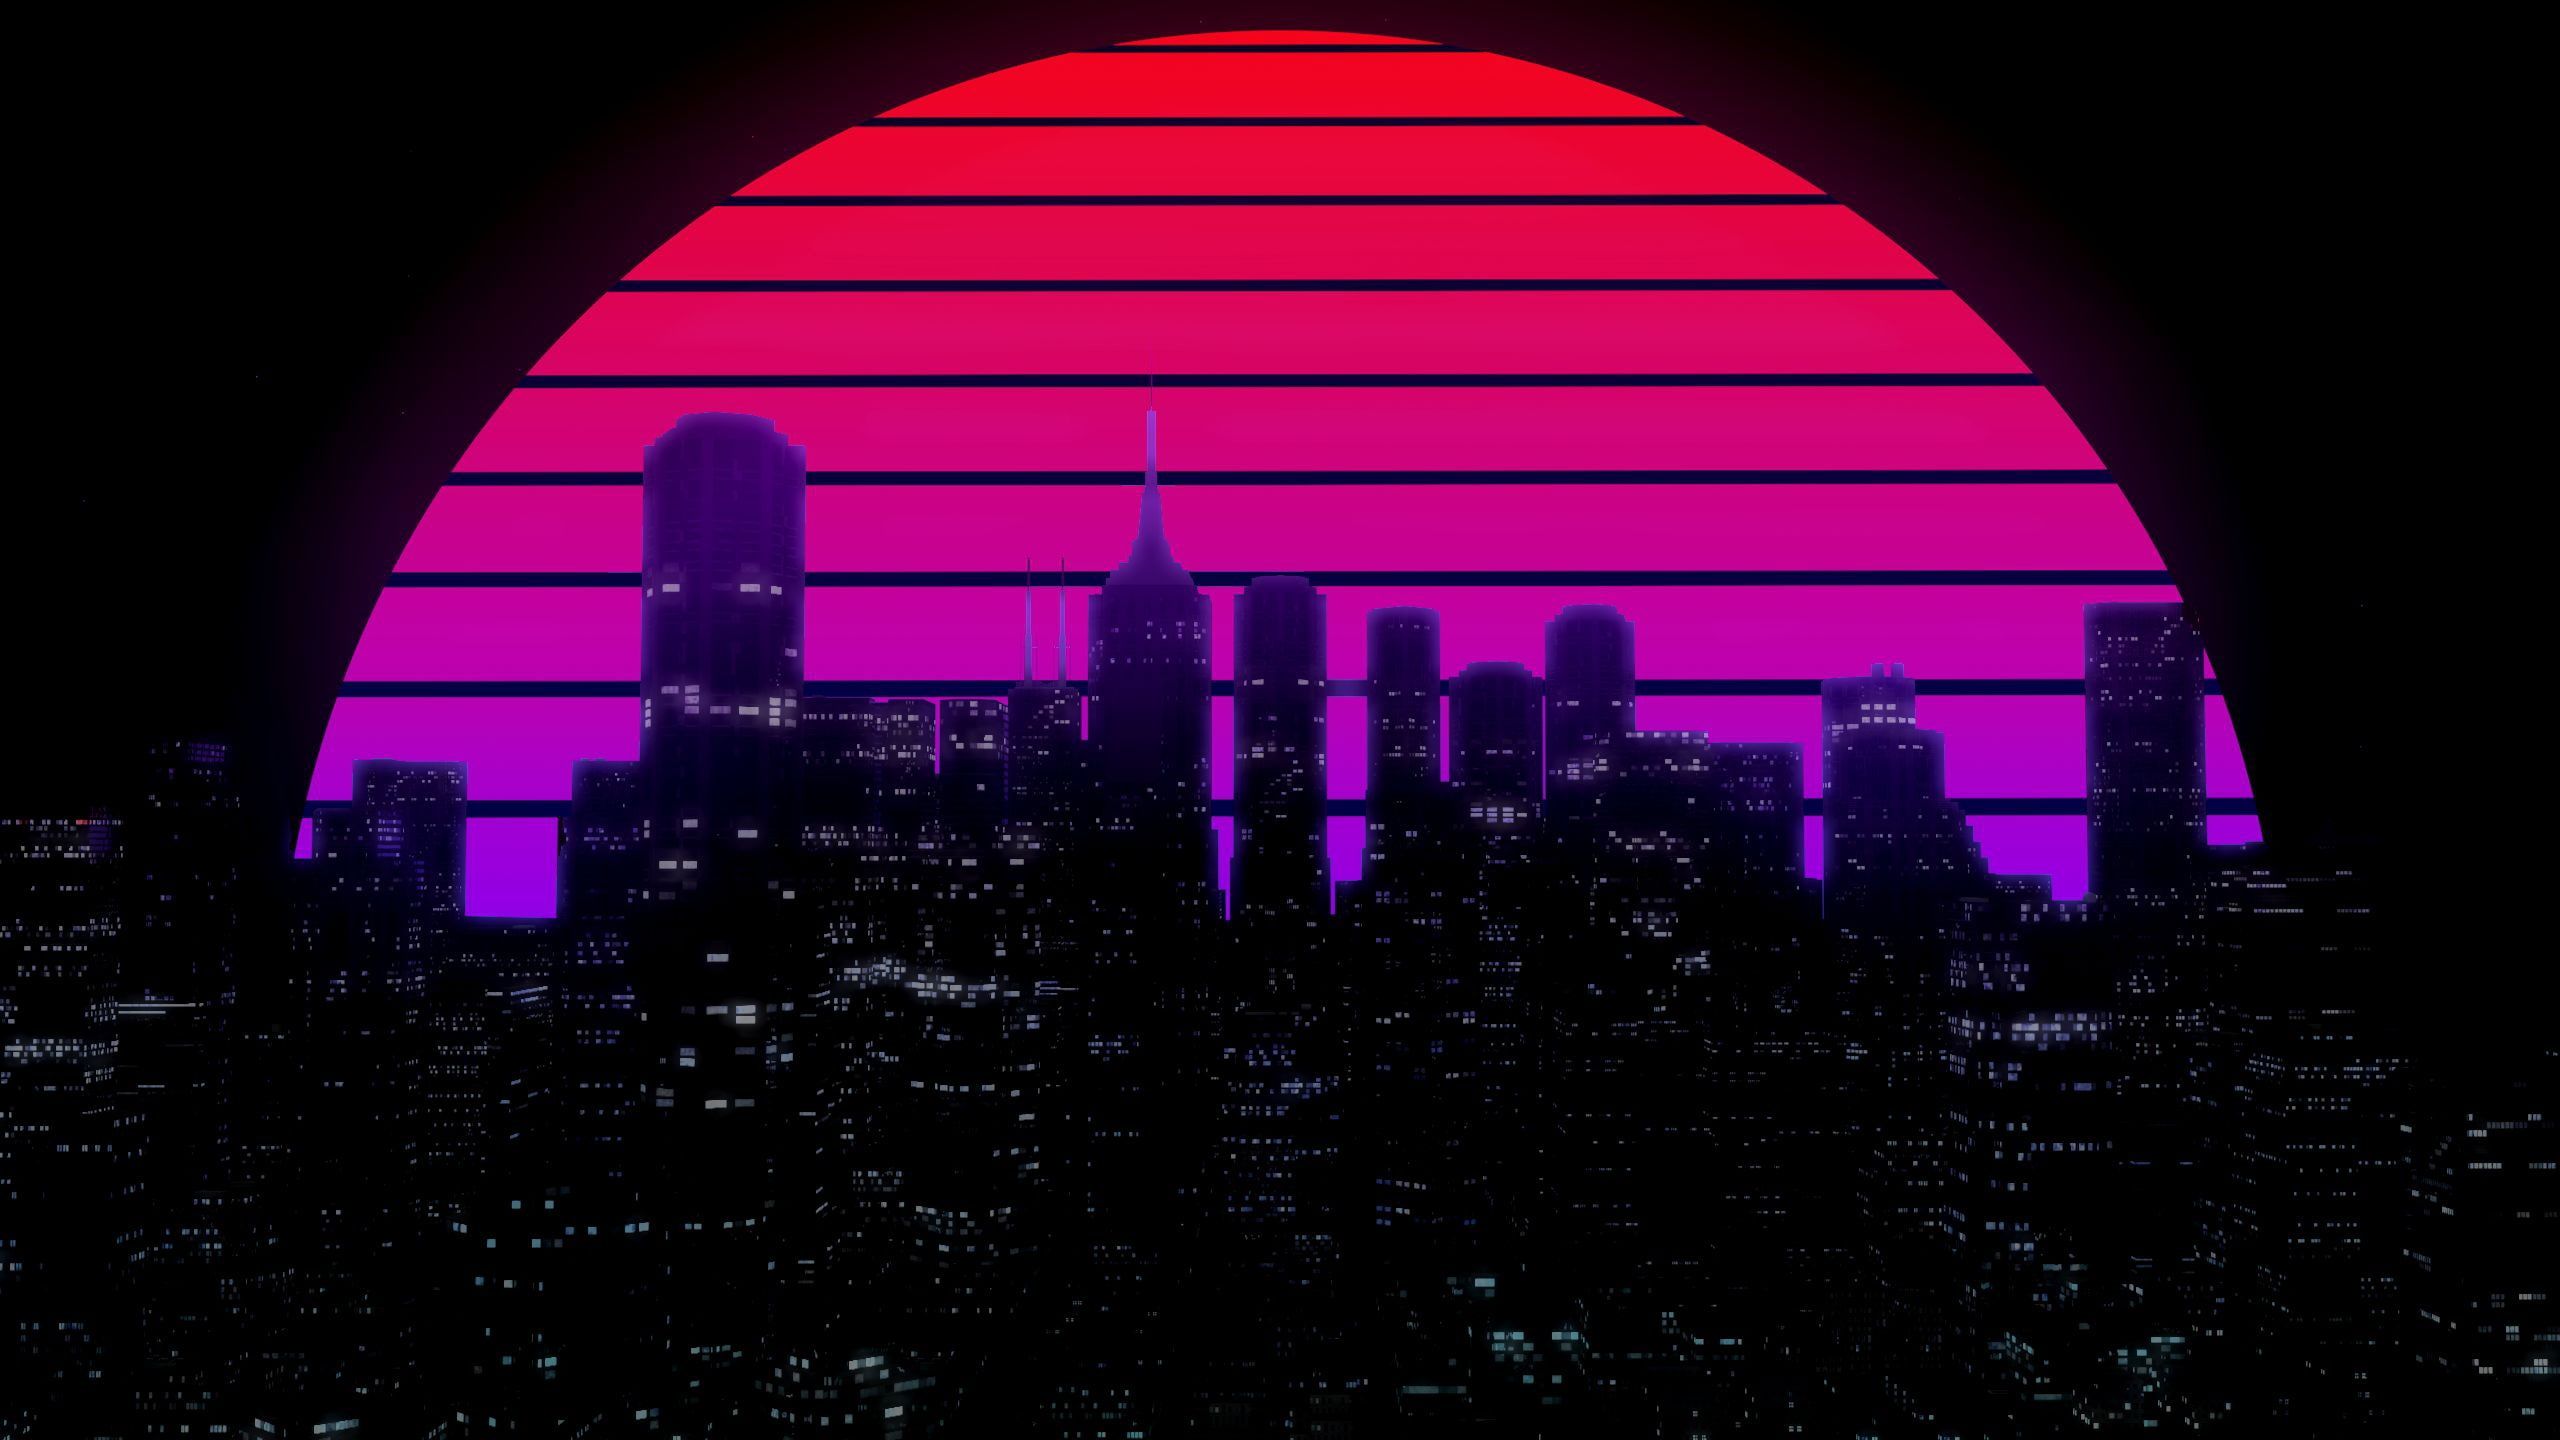 The sun #Night #Music The city #Star #Building #Background s #Neon 's #Synth #Retrow. Aesthetic wallpaper, Cityscape wallpaper, Aesthetic desktop wallpaper